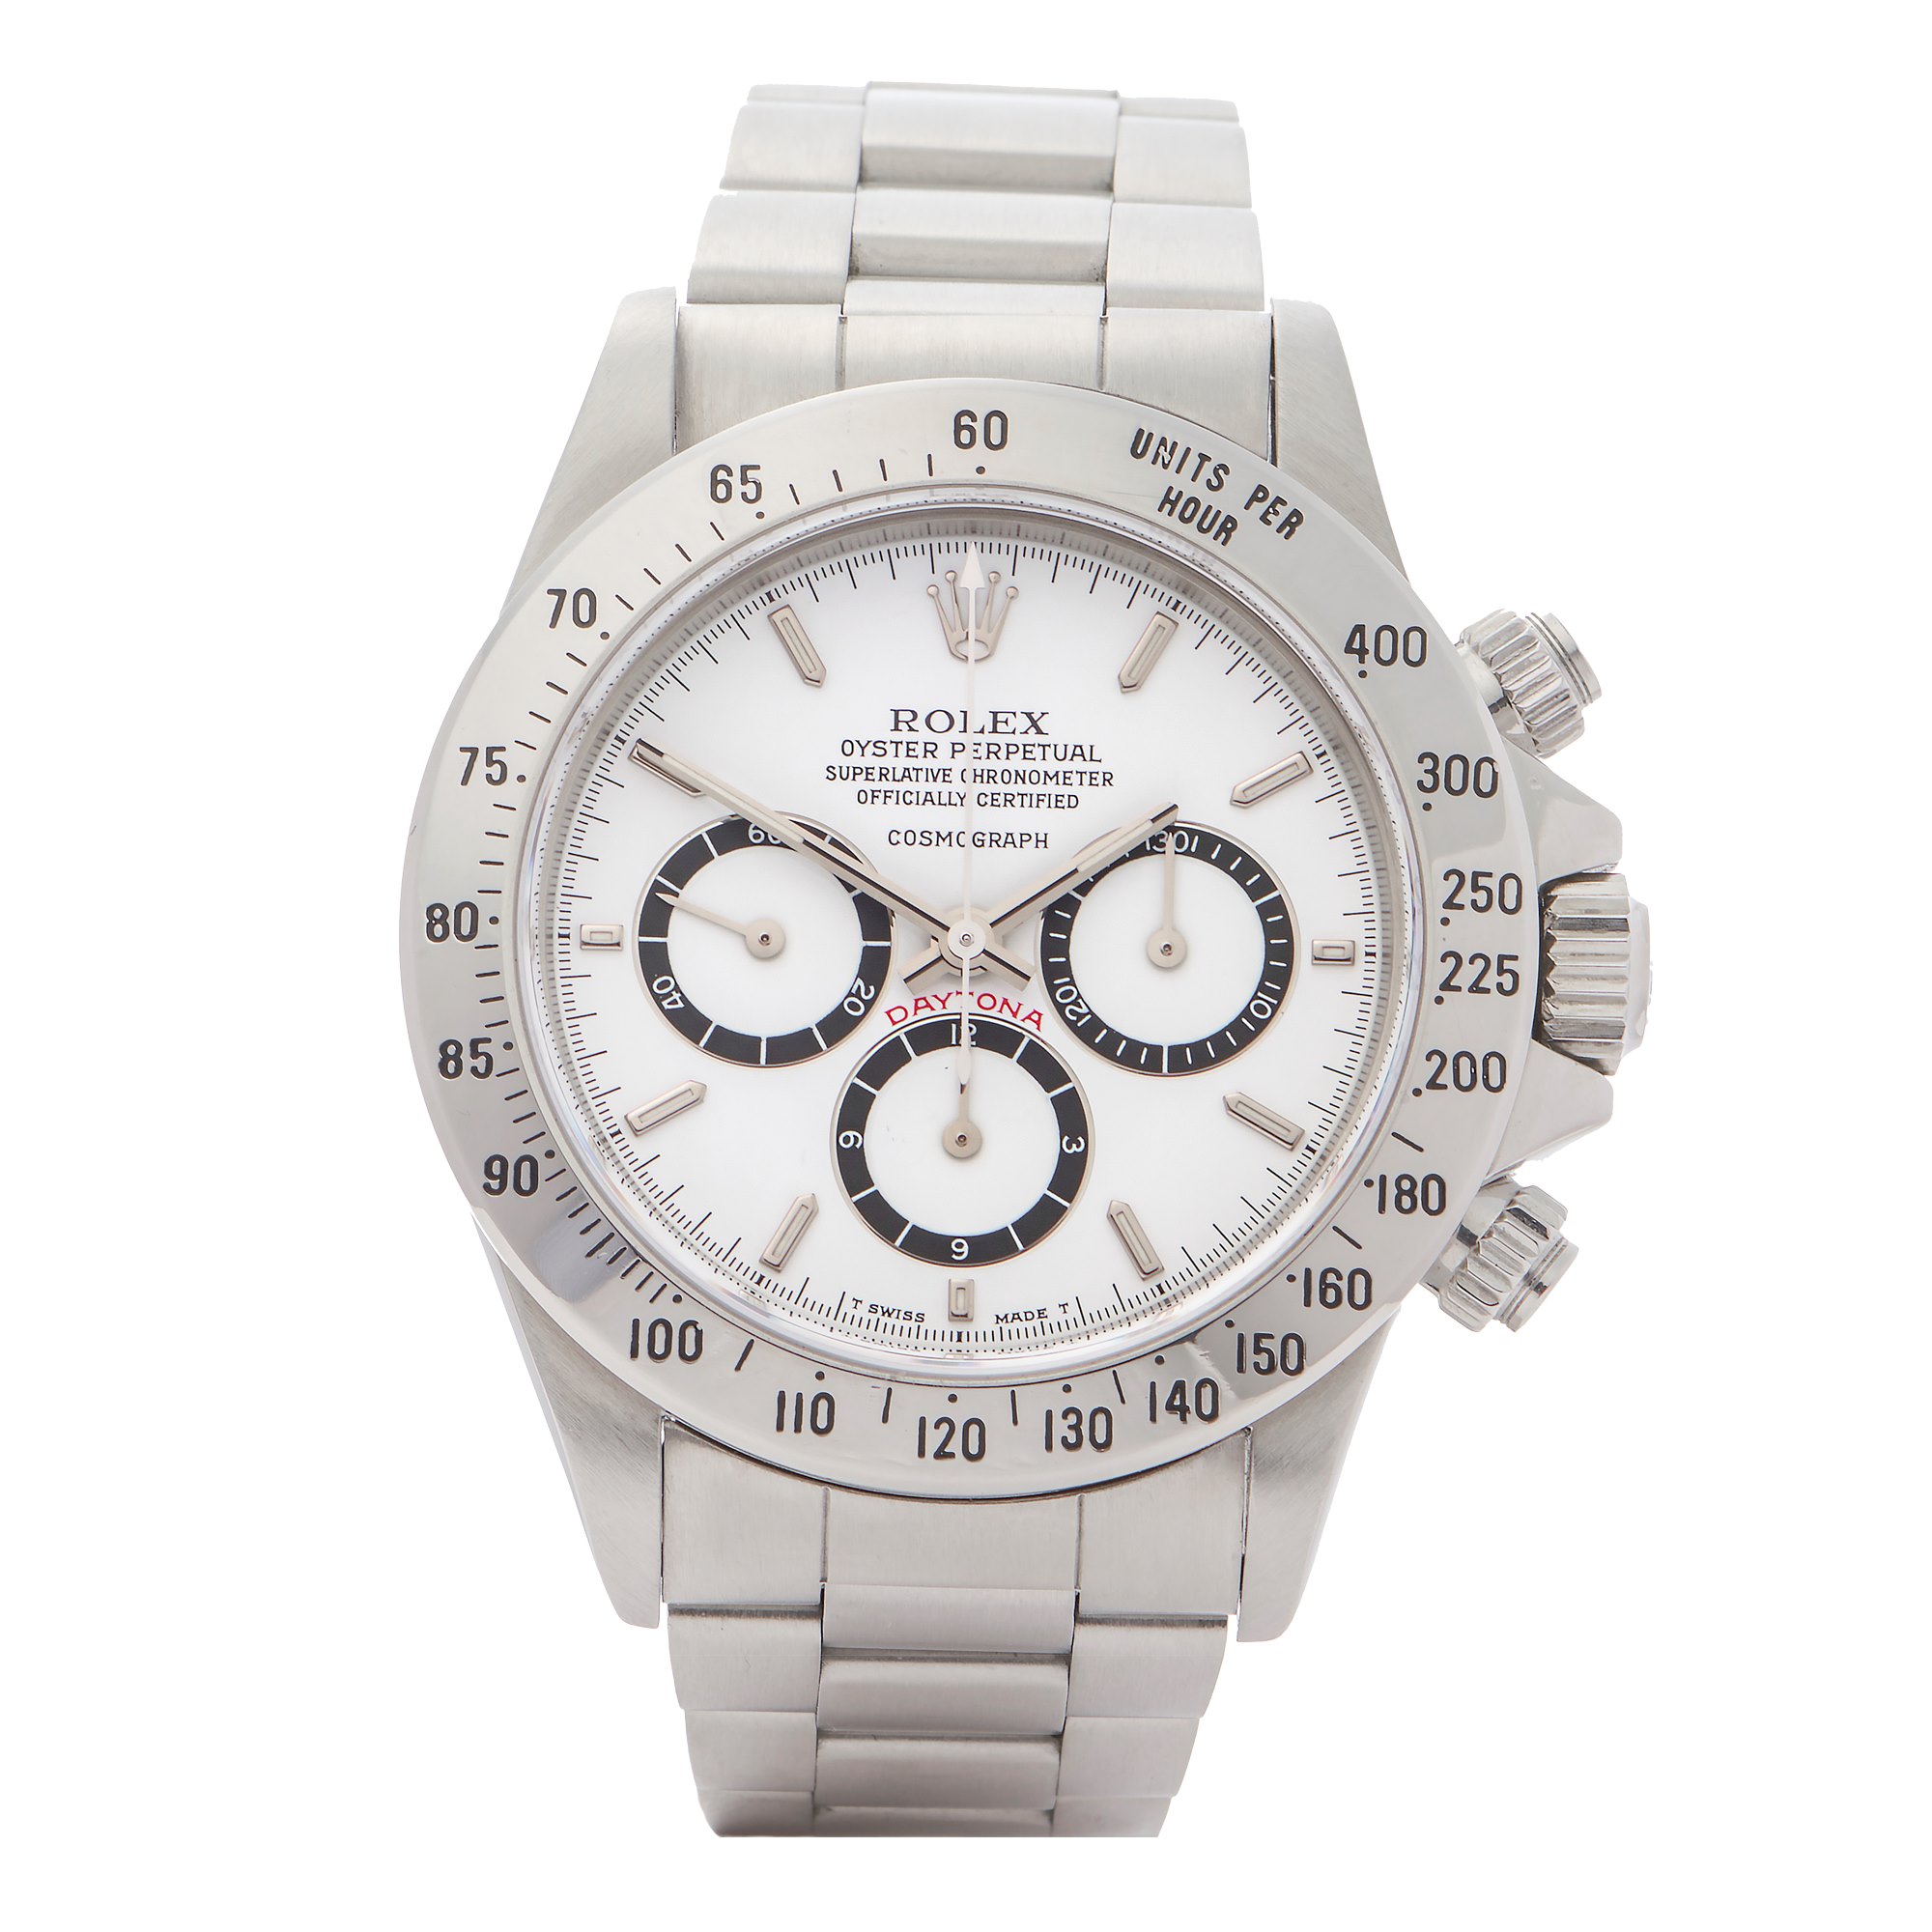 Rolex Daytona Floating Cosmograph, Inverted 6 Stainless Steel 16520